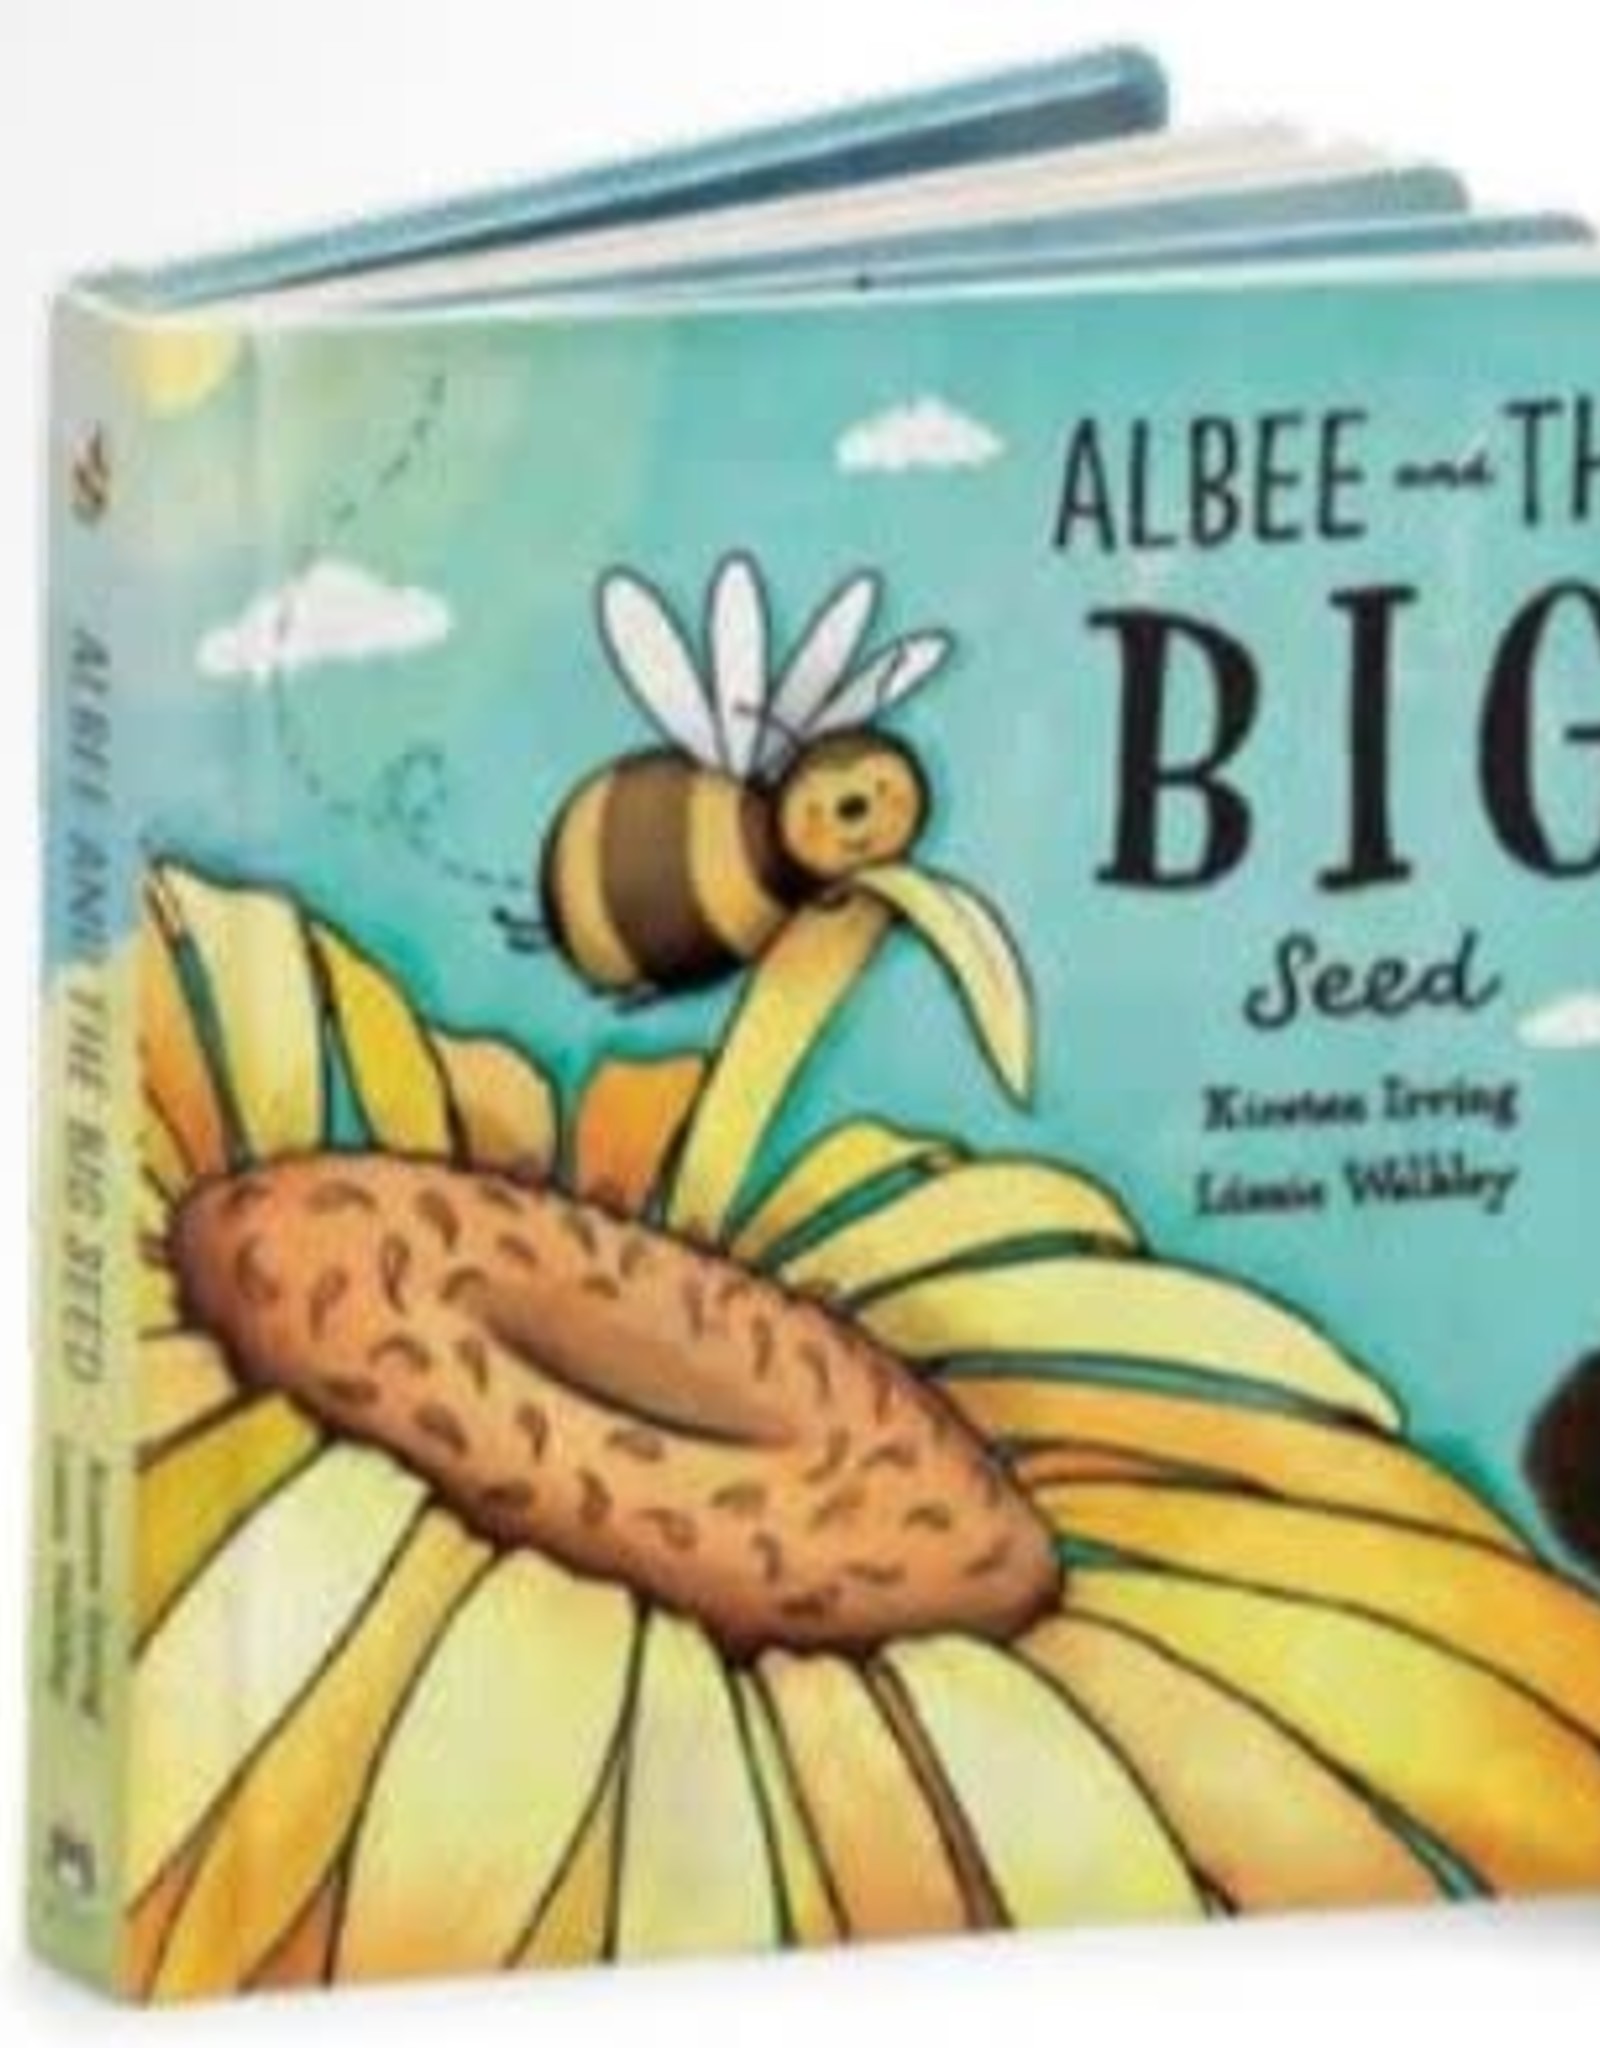 JellyCat ALBEE AND THE BIG SEED BOOK